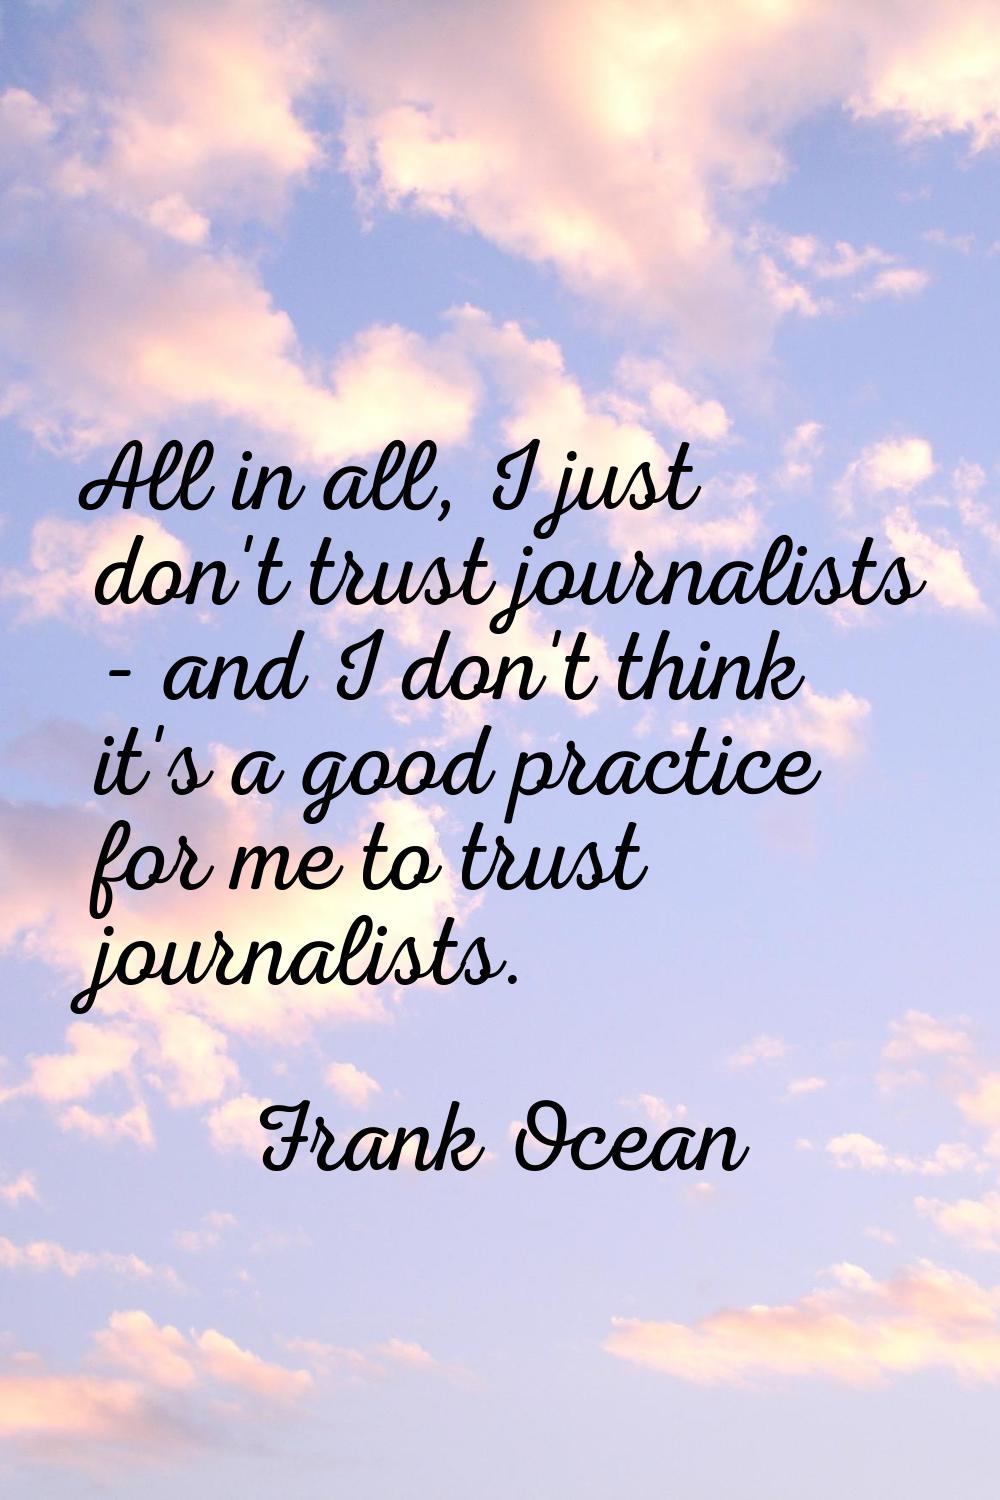 All in all, I just don't trust journalists - and I don't think it's a good practice for me to trust